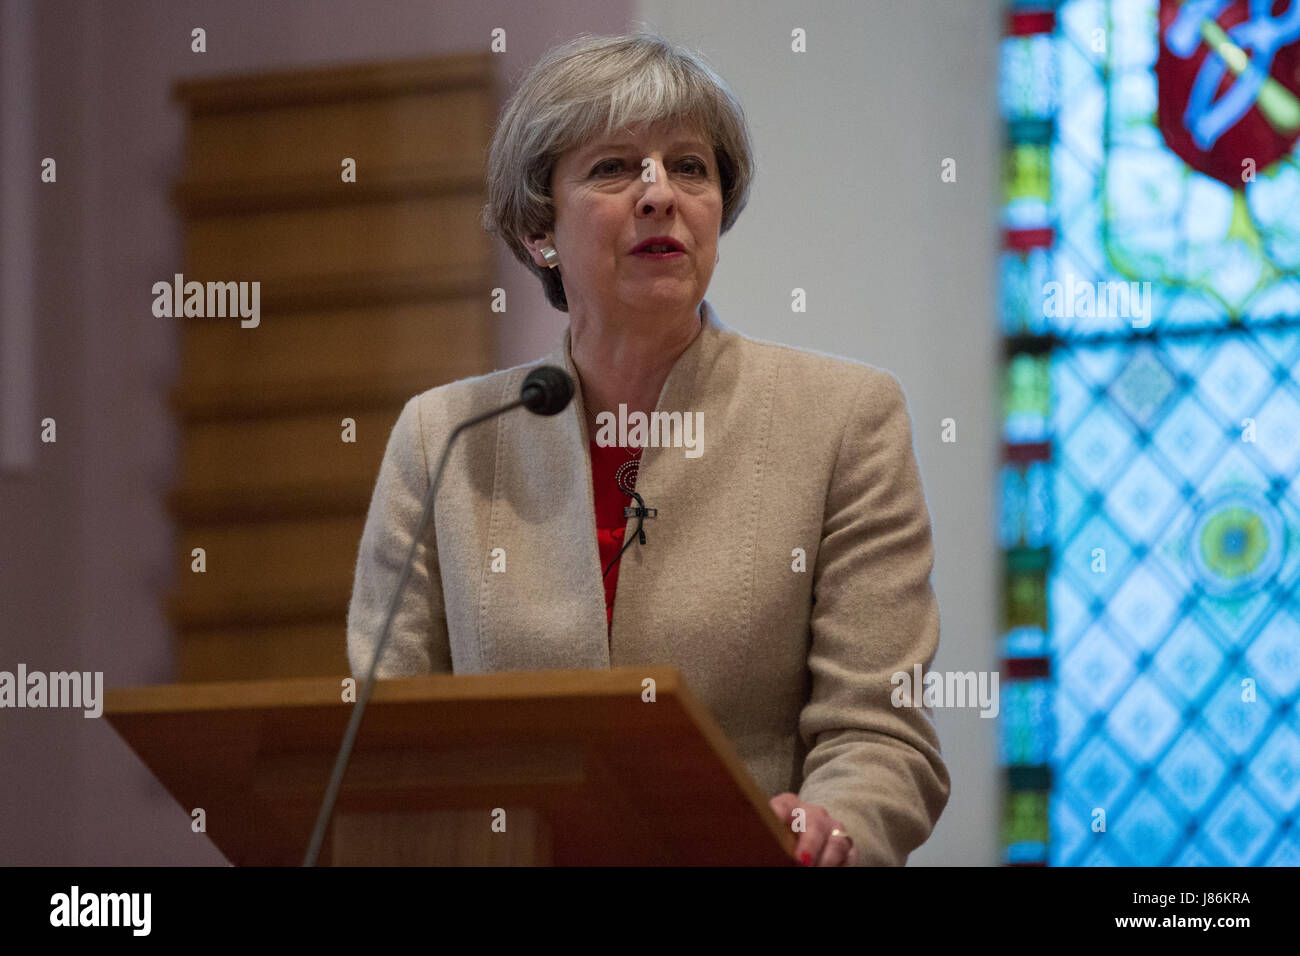 Maidenhead, UK. 27th May, 2017. Theresa May, Prime Minister and Conservative candidate for the Maidenhead constituency, speaks at a hustings event for the forthcoming general election at the High Street Methodist Church. Credit: Mark Kerrison/Alamy Live News Stock Photo